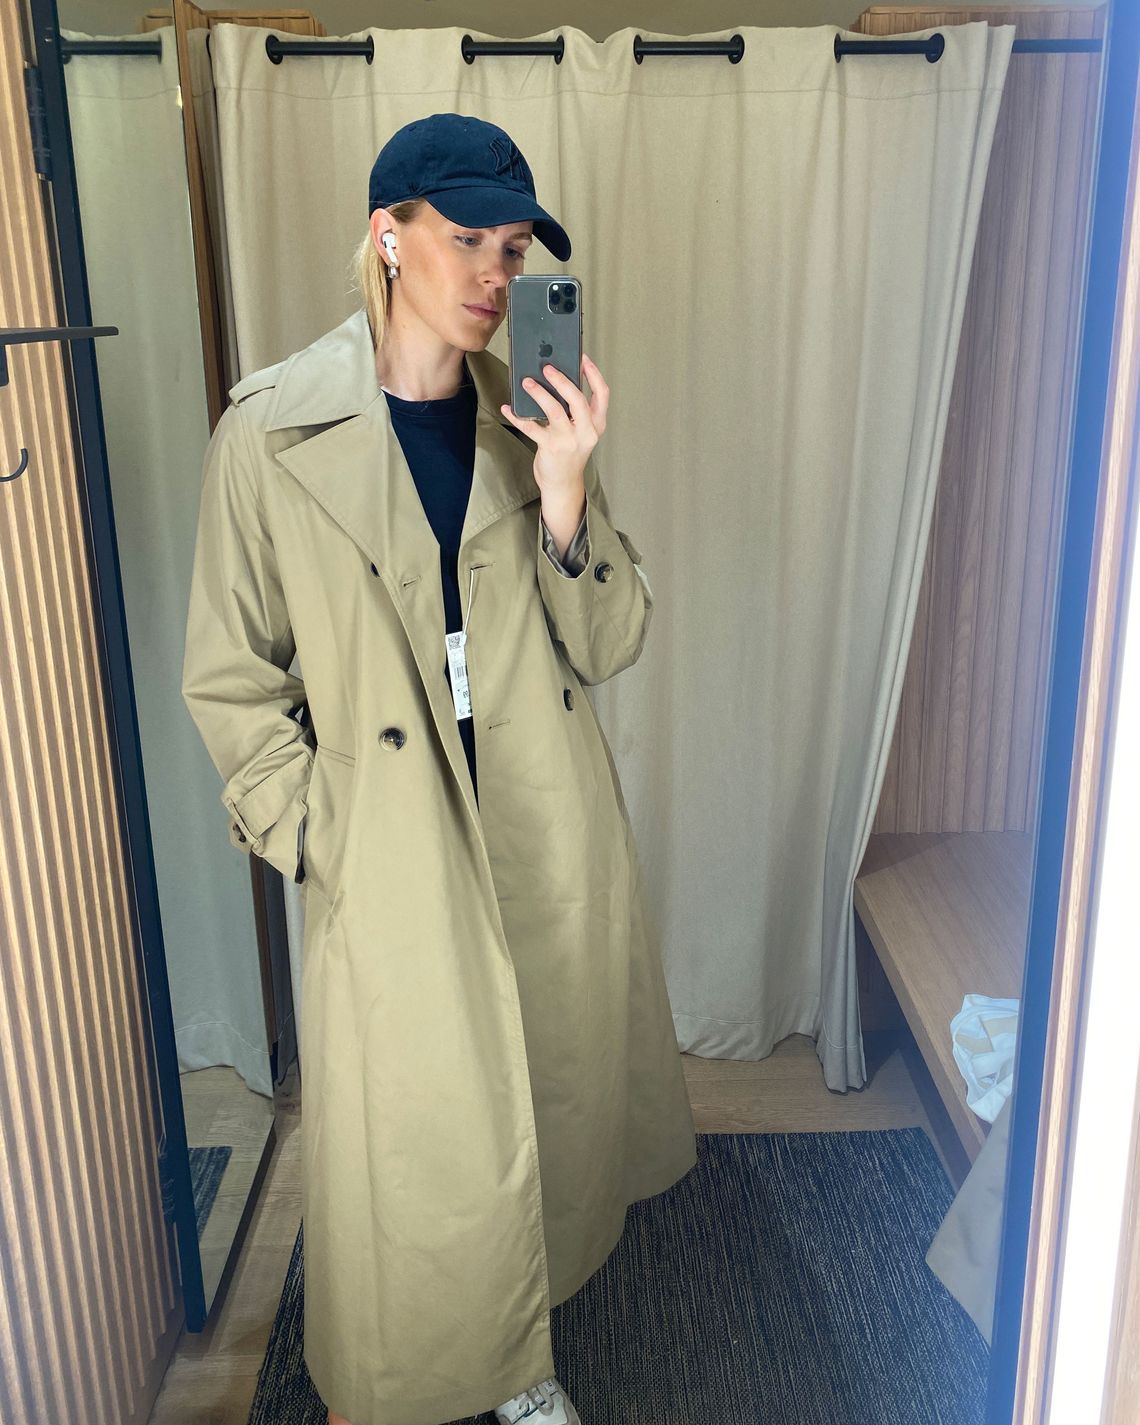 12 Versatile Trench-Coat Outfits to Test Out This Season